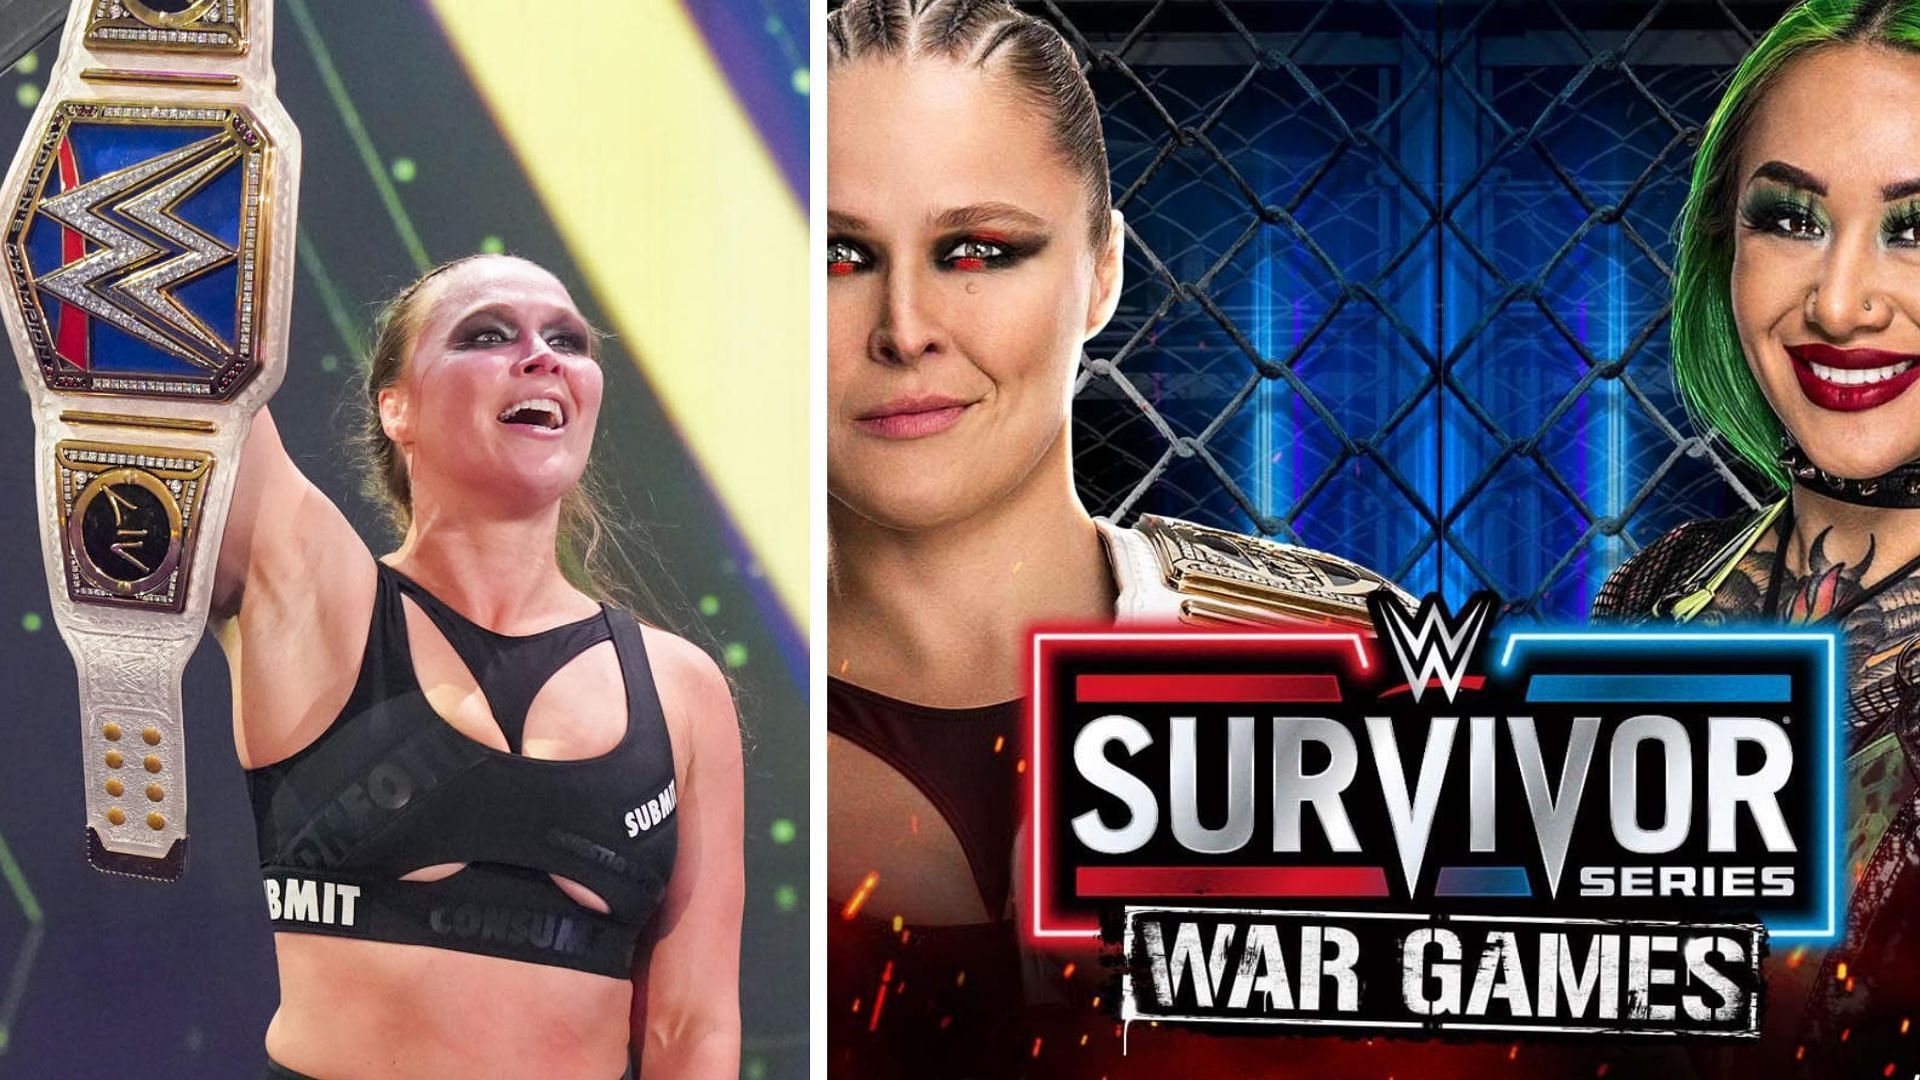 Ronda Rousey will defend the SmackDown Women